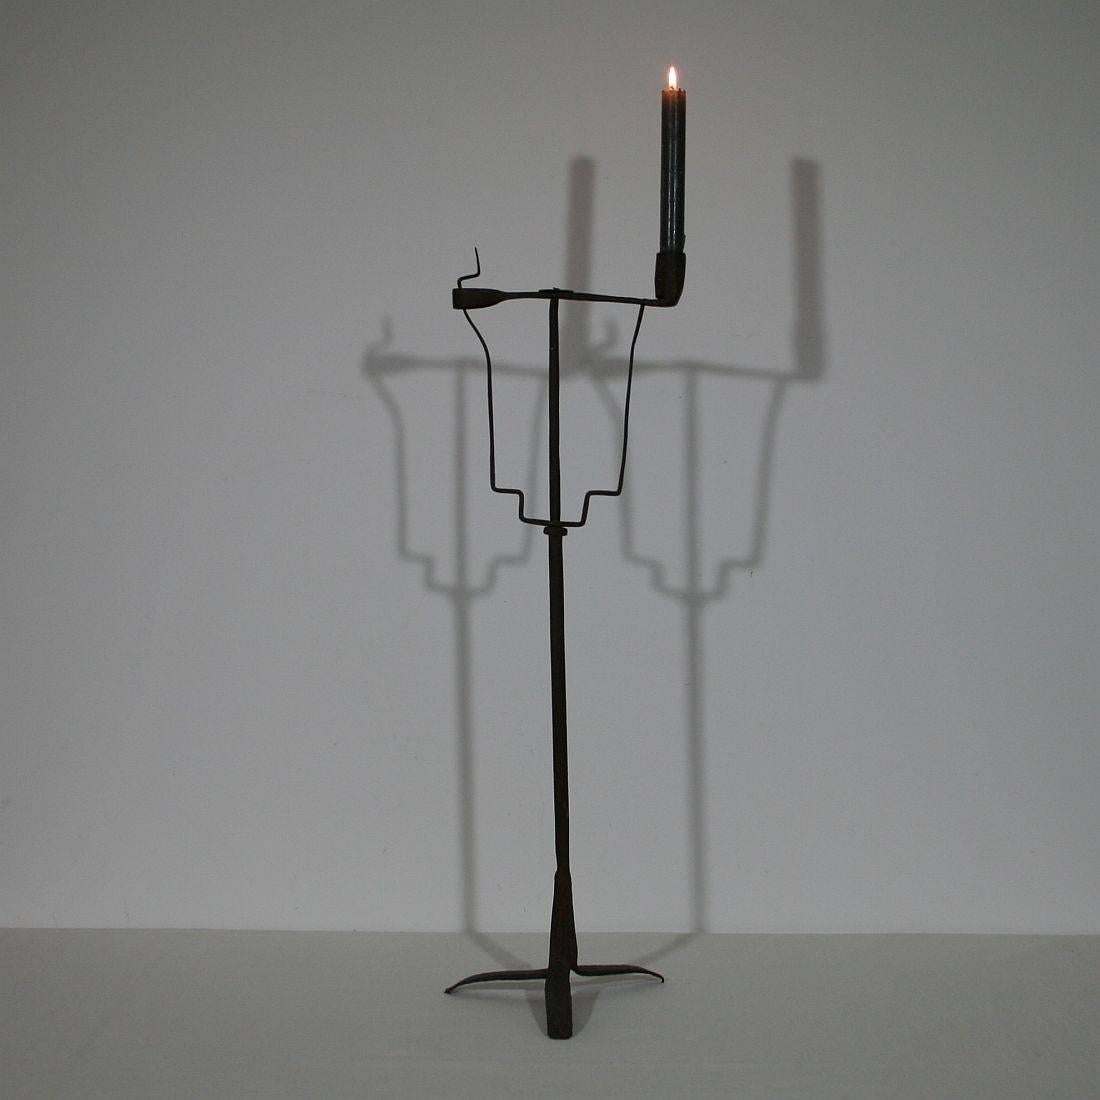 Very old and beautiful hand-forged iron candleholder
France, circa 1700-1750.